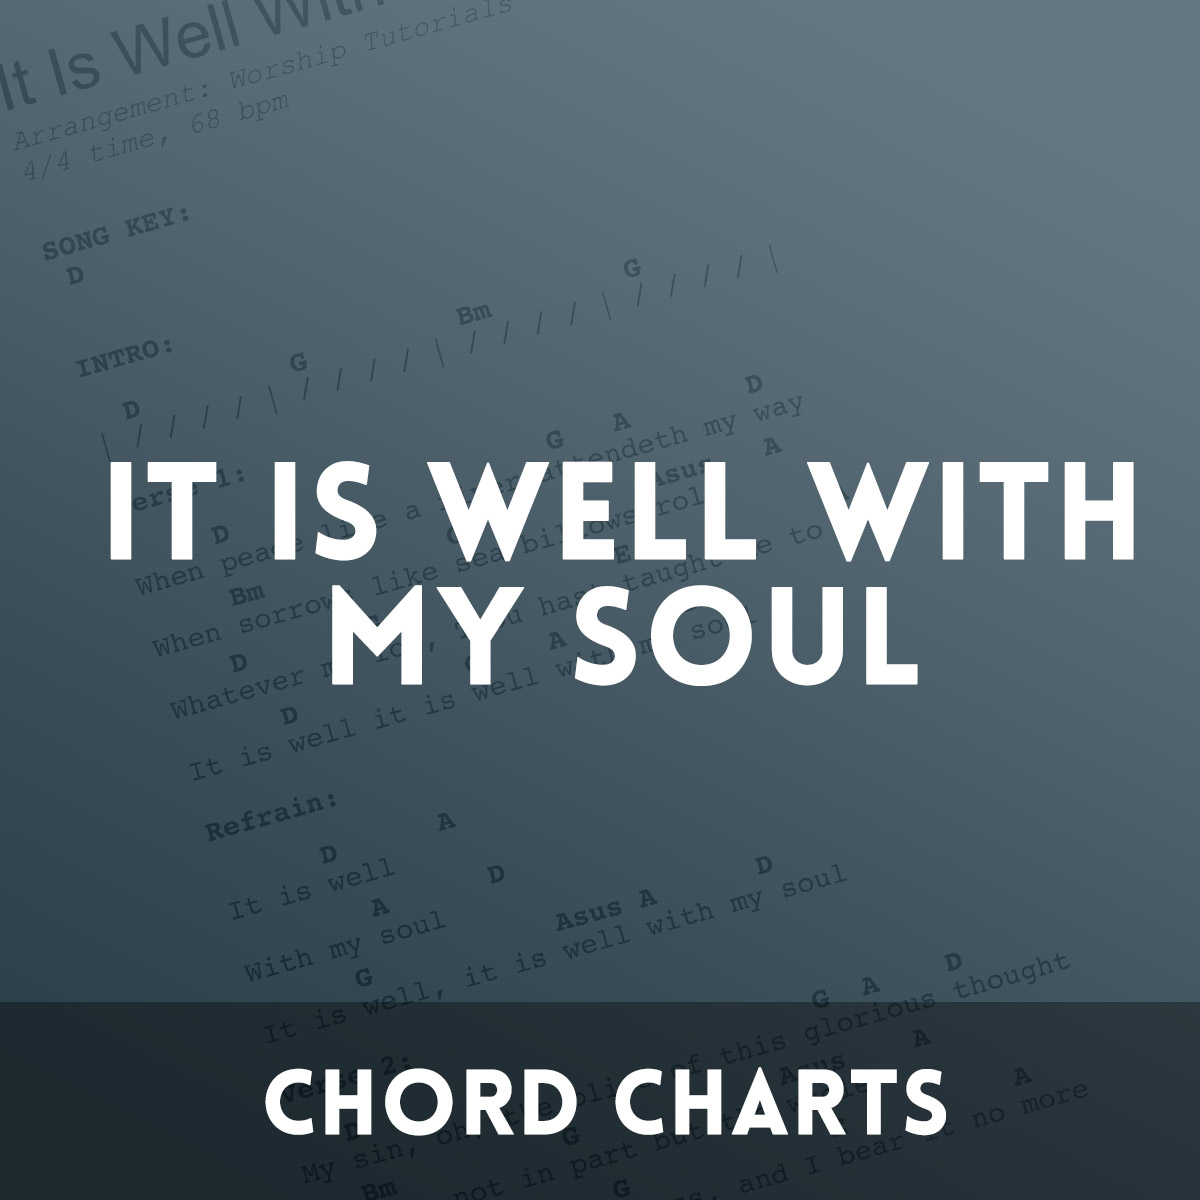 it is well with my soul hillsong sheet music